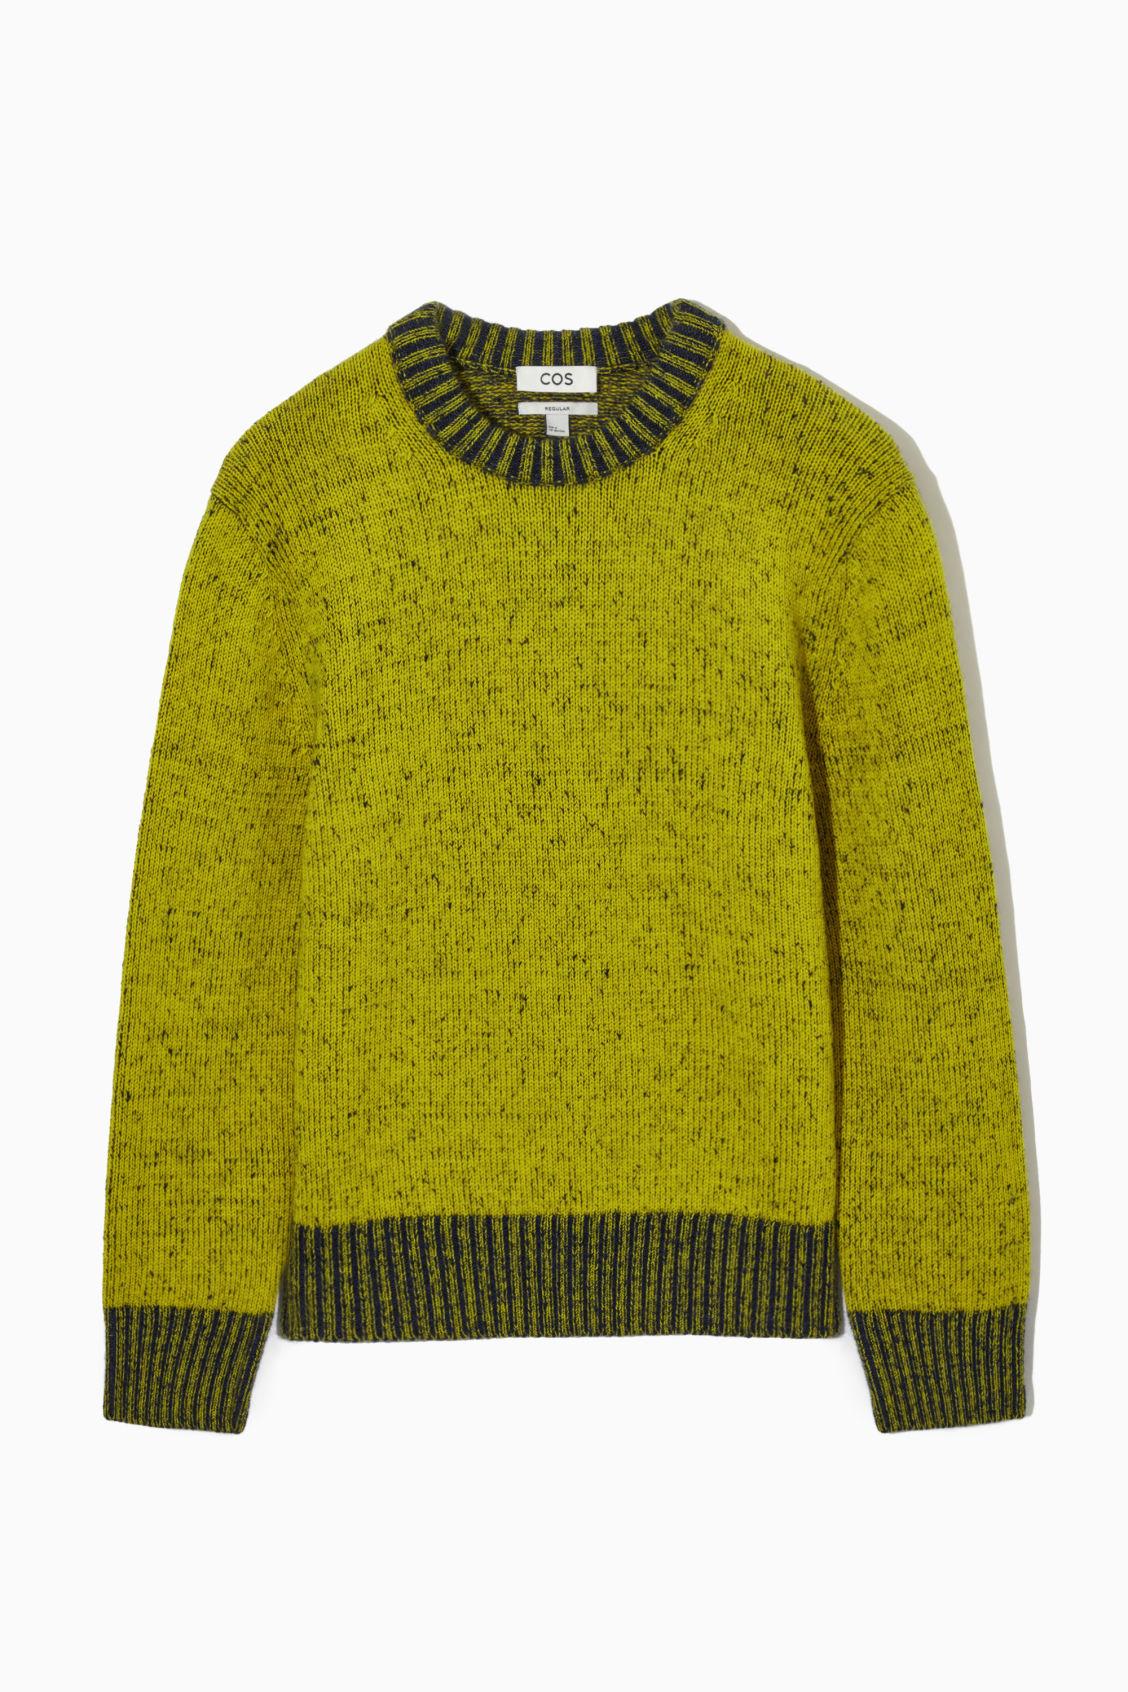 COS Mohair And Wool-blend Crew Neck Sweater in Green for Men |